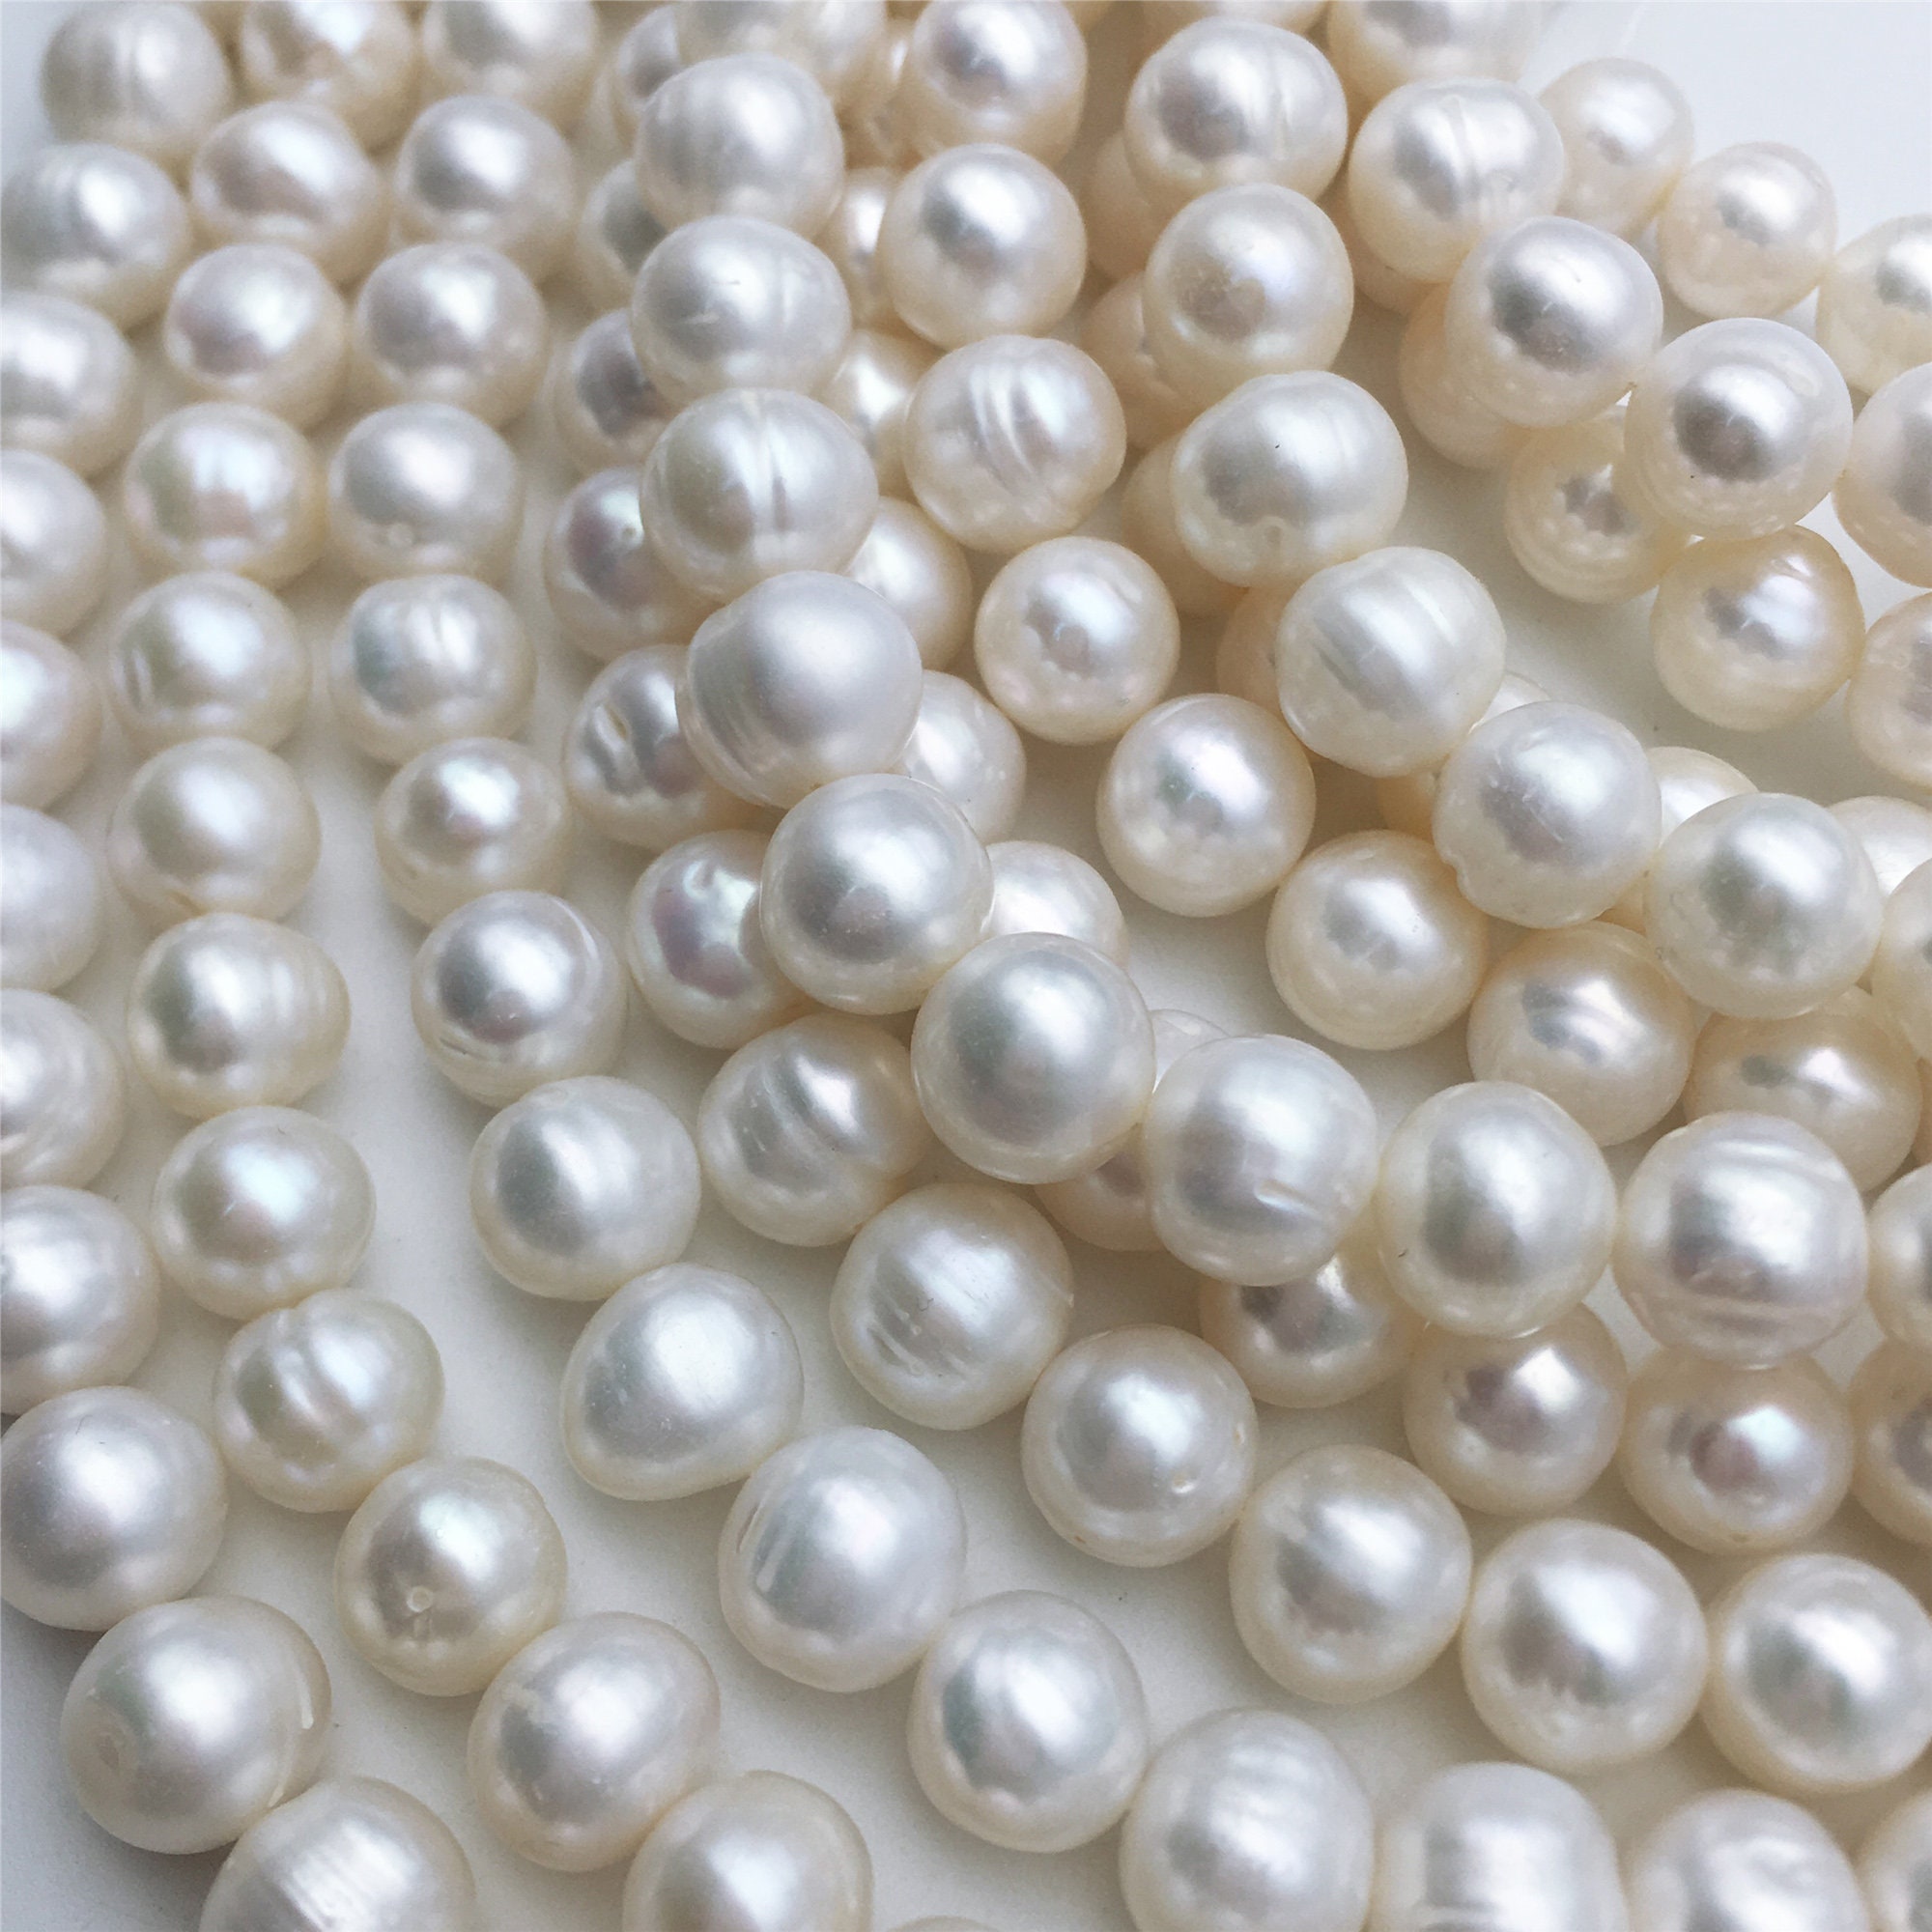 High Grade Freshwater White-green Round Pearl Beads 9-10 mm #9